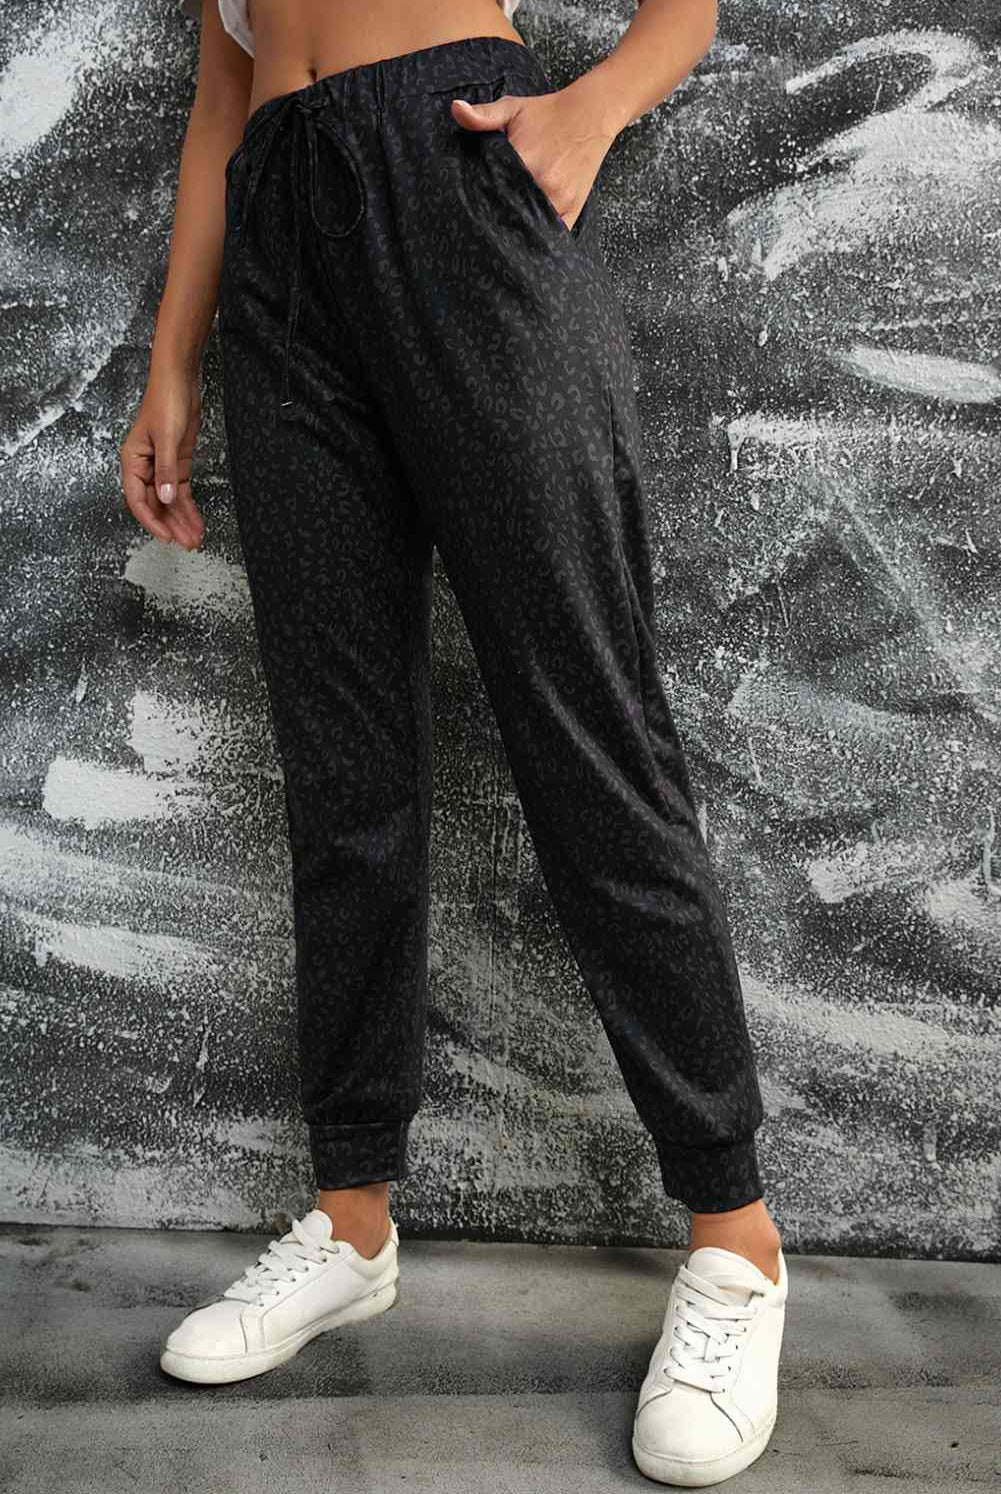 Double Take Leopard Print Joggers with Pockets - GemThreads Boutique Double Take Leopard Print Joggers with Pockets